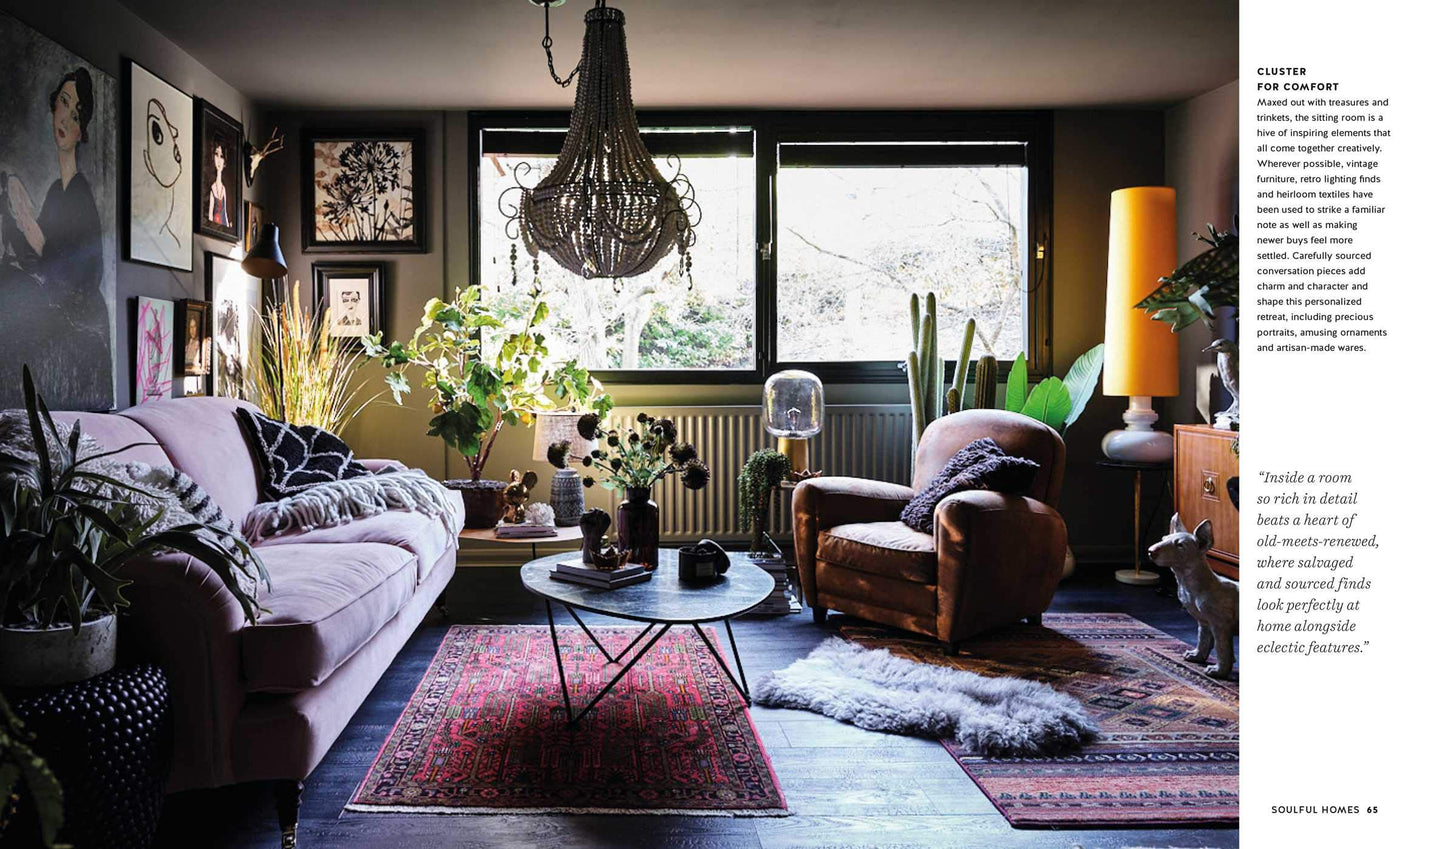 Home for the Soul: Sustainable and Thoughtful Decorating and Design